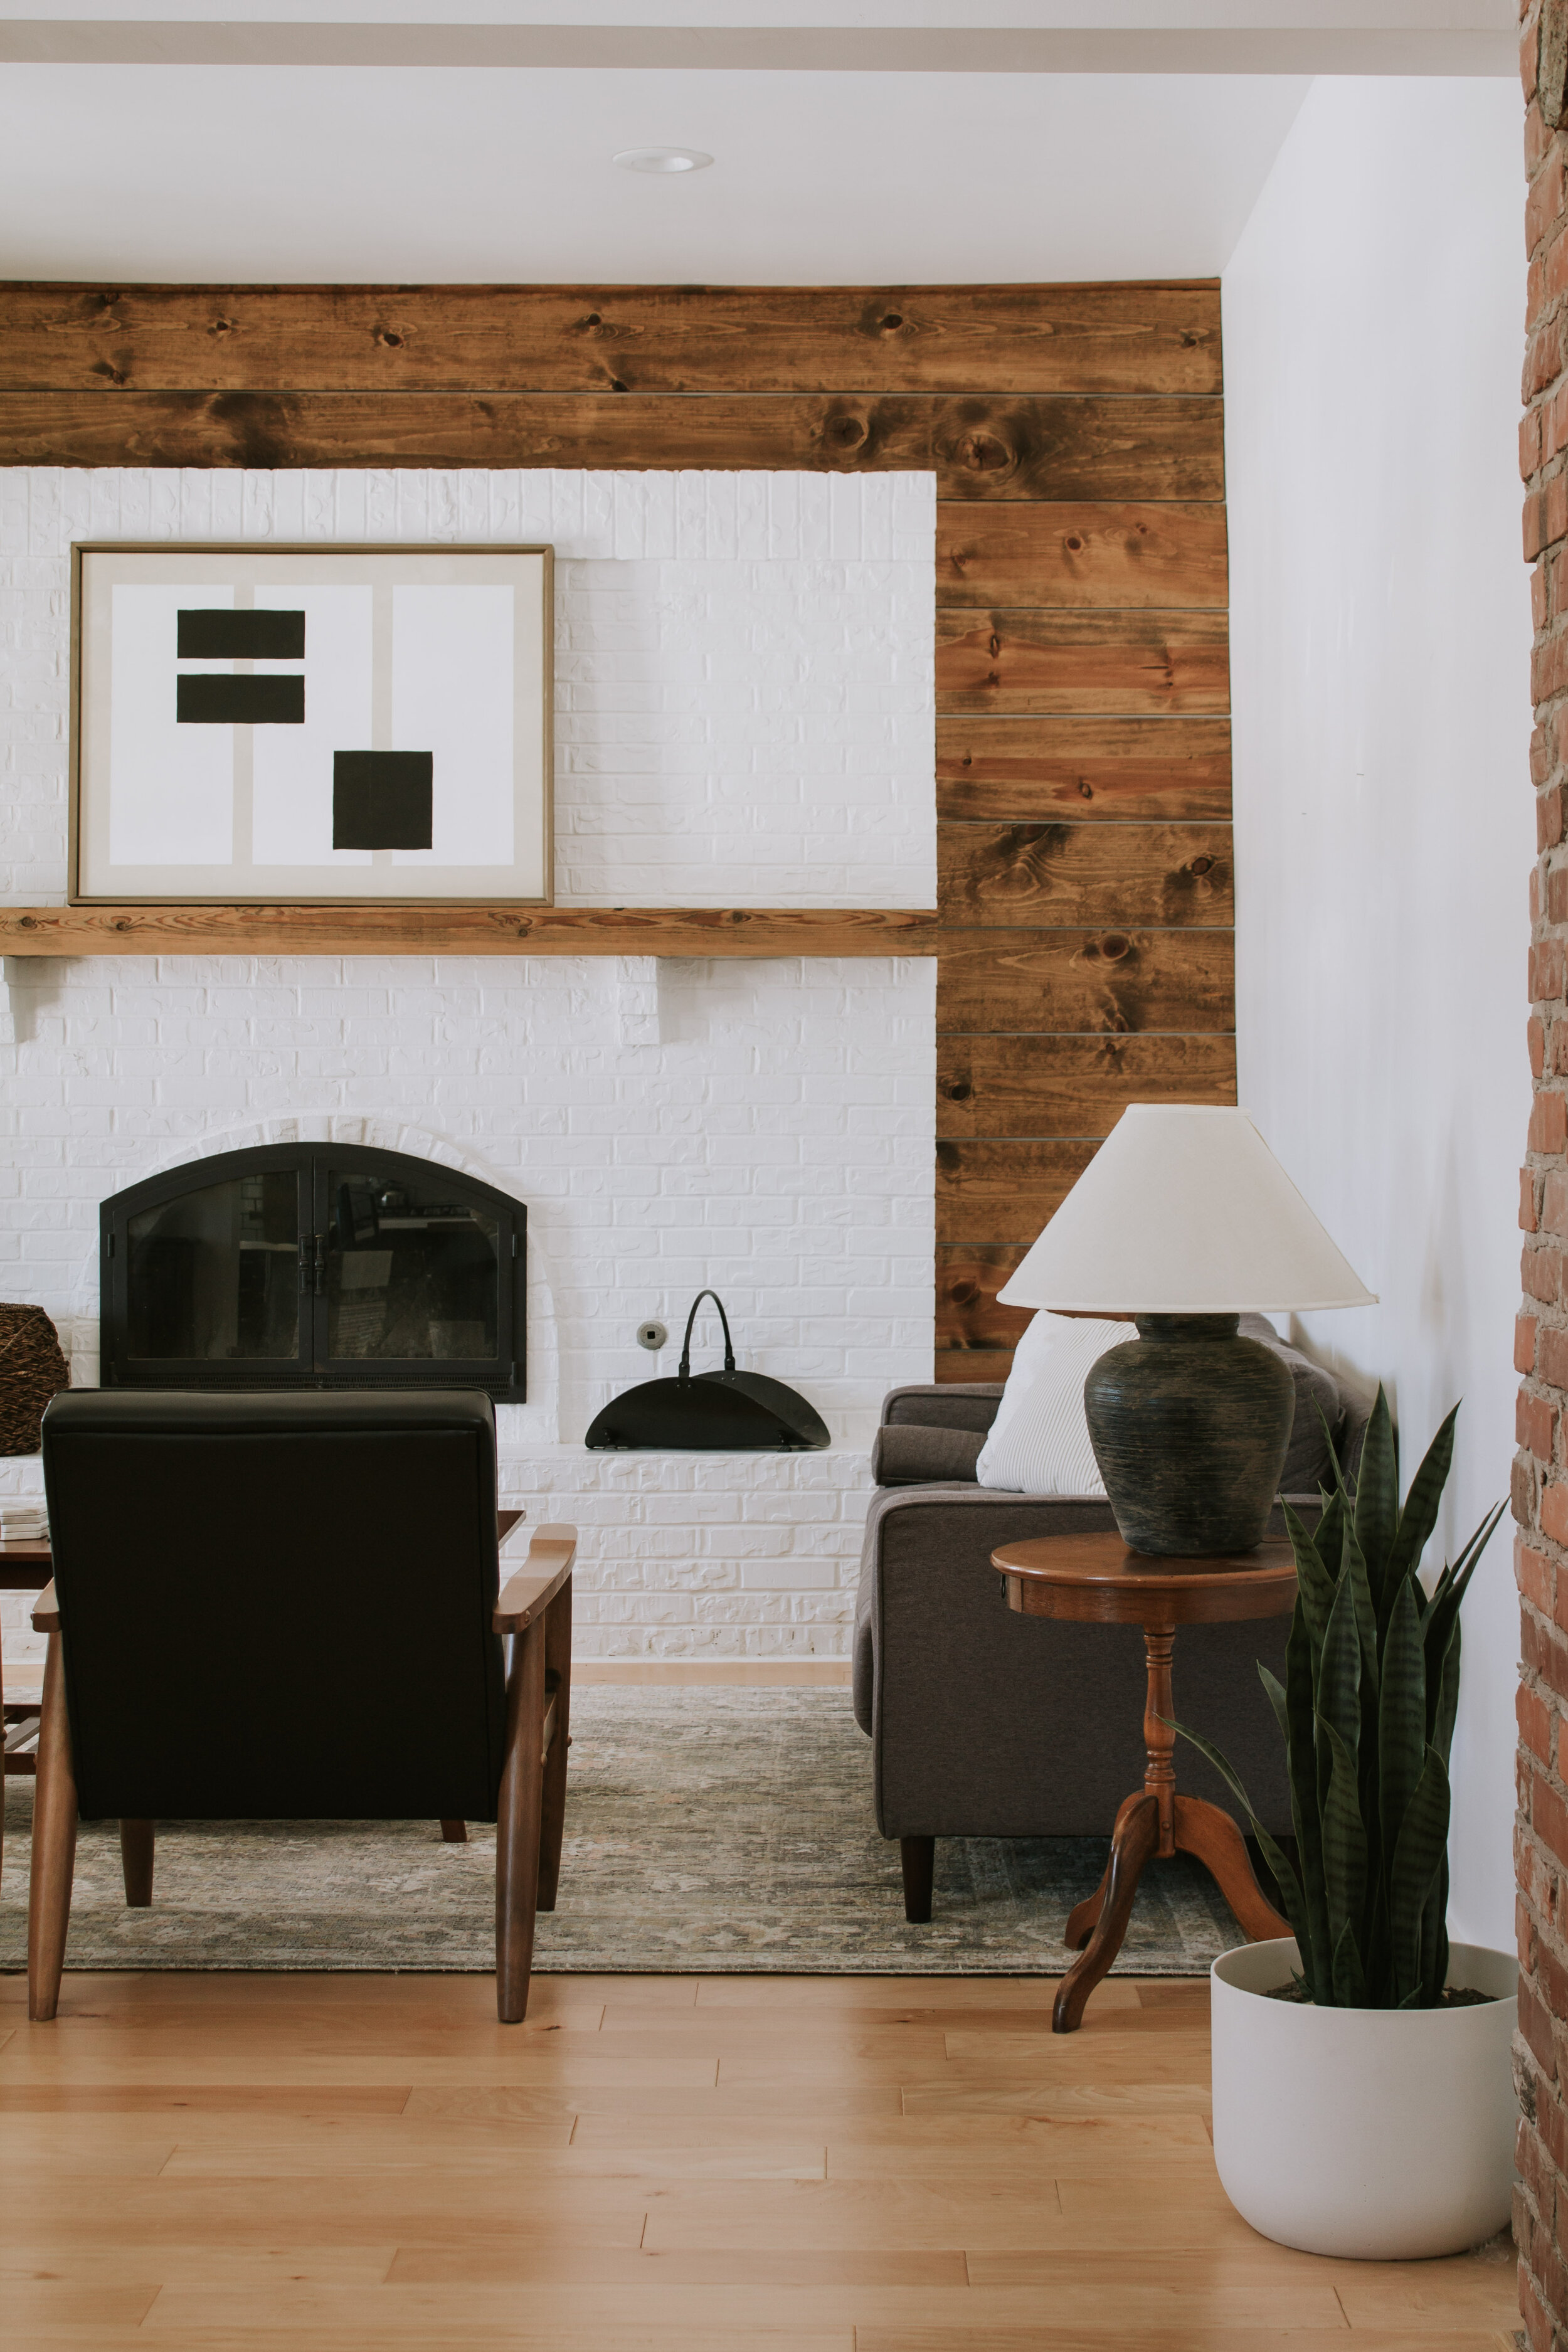 Our living room: what's working, what's not, and a makeover game plan - Nadine Stay | Modern cabin living room. Brick fireplace feature wall inspiration. Shiplap wood wall and living room design by Nadine Stay